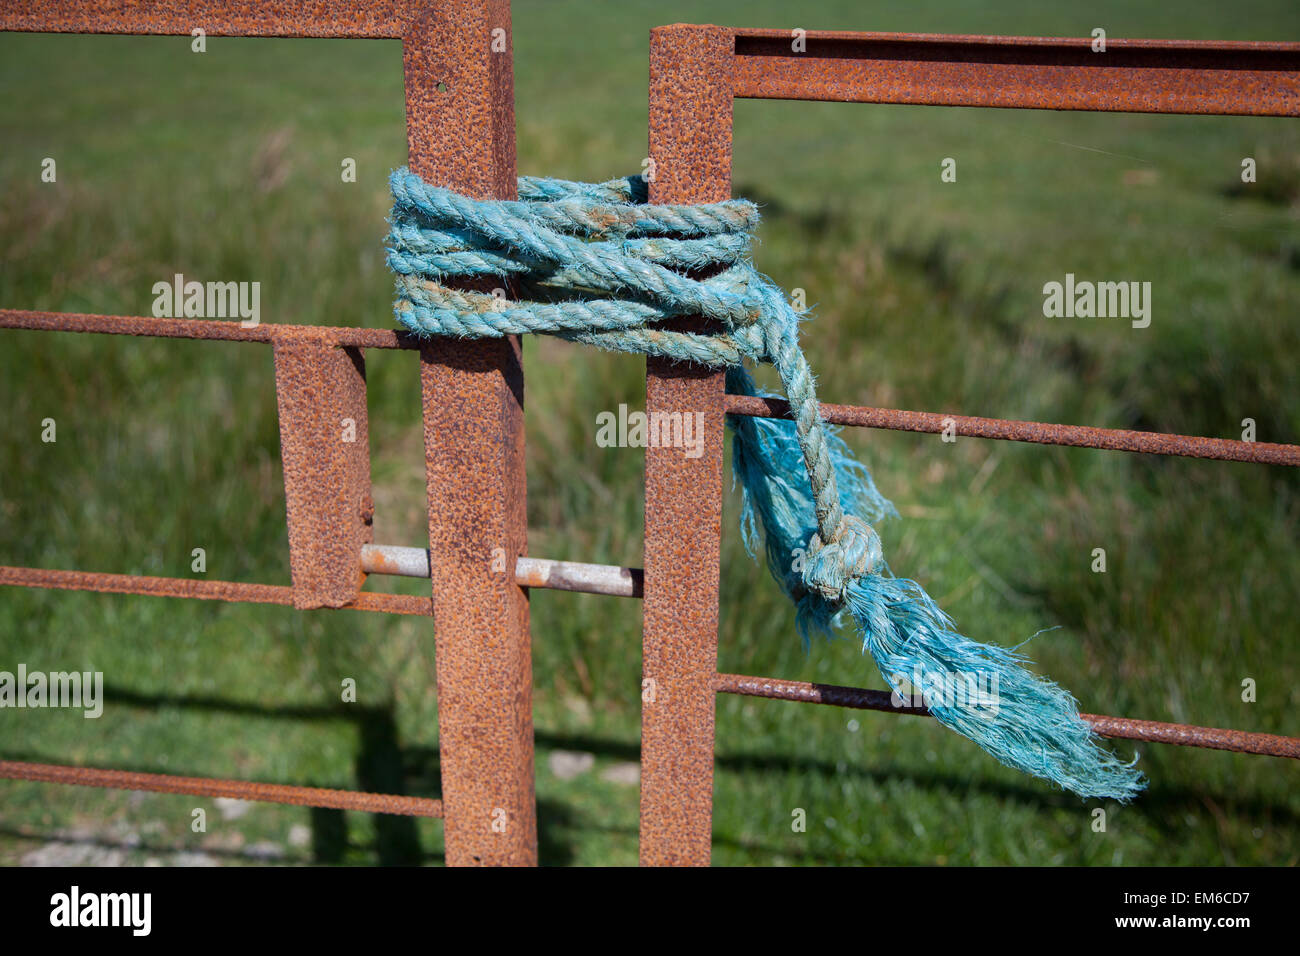 close-up creative shot of a pitted rusty farm gate tied shut with blue rope / twine with green grass and blue sky in background Stock Photo